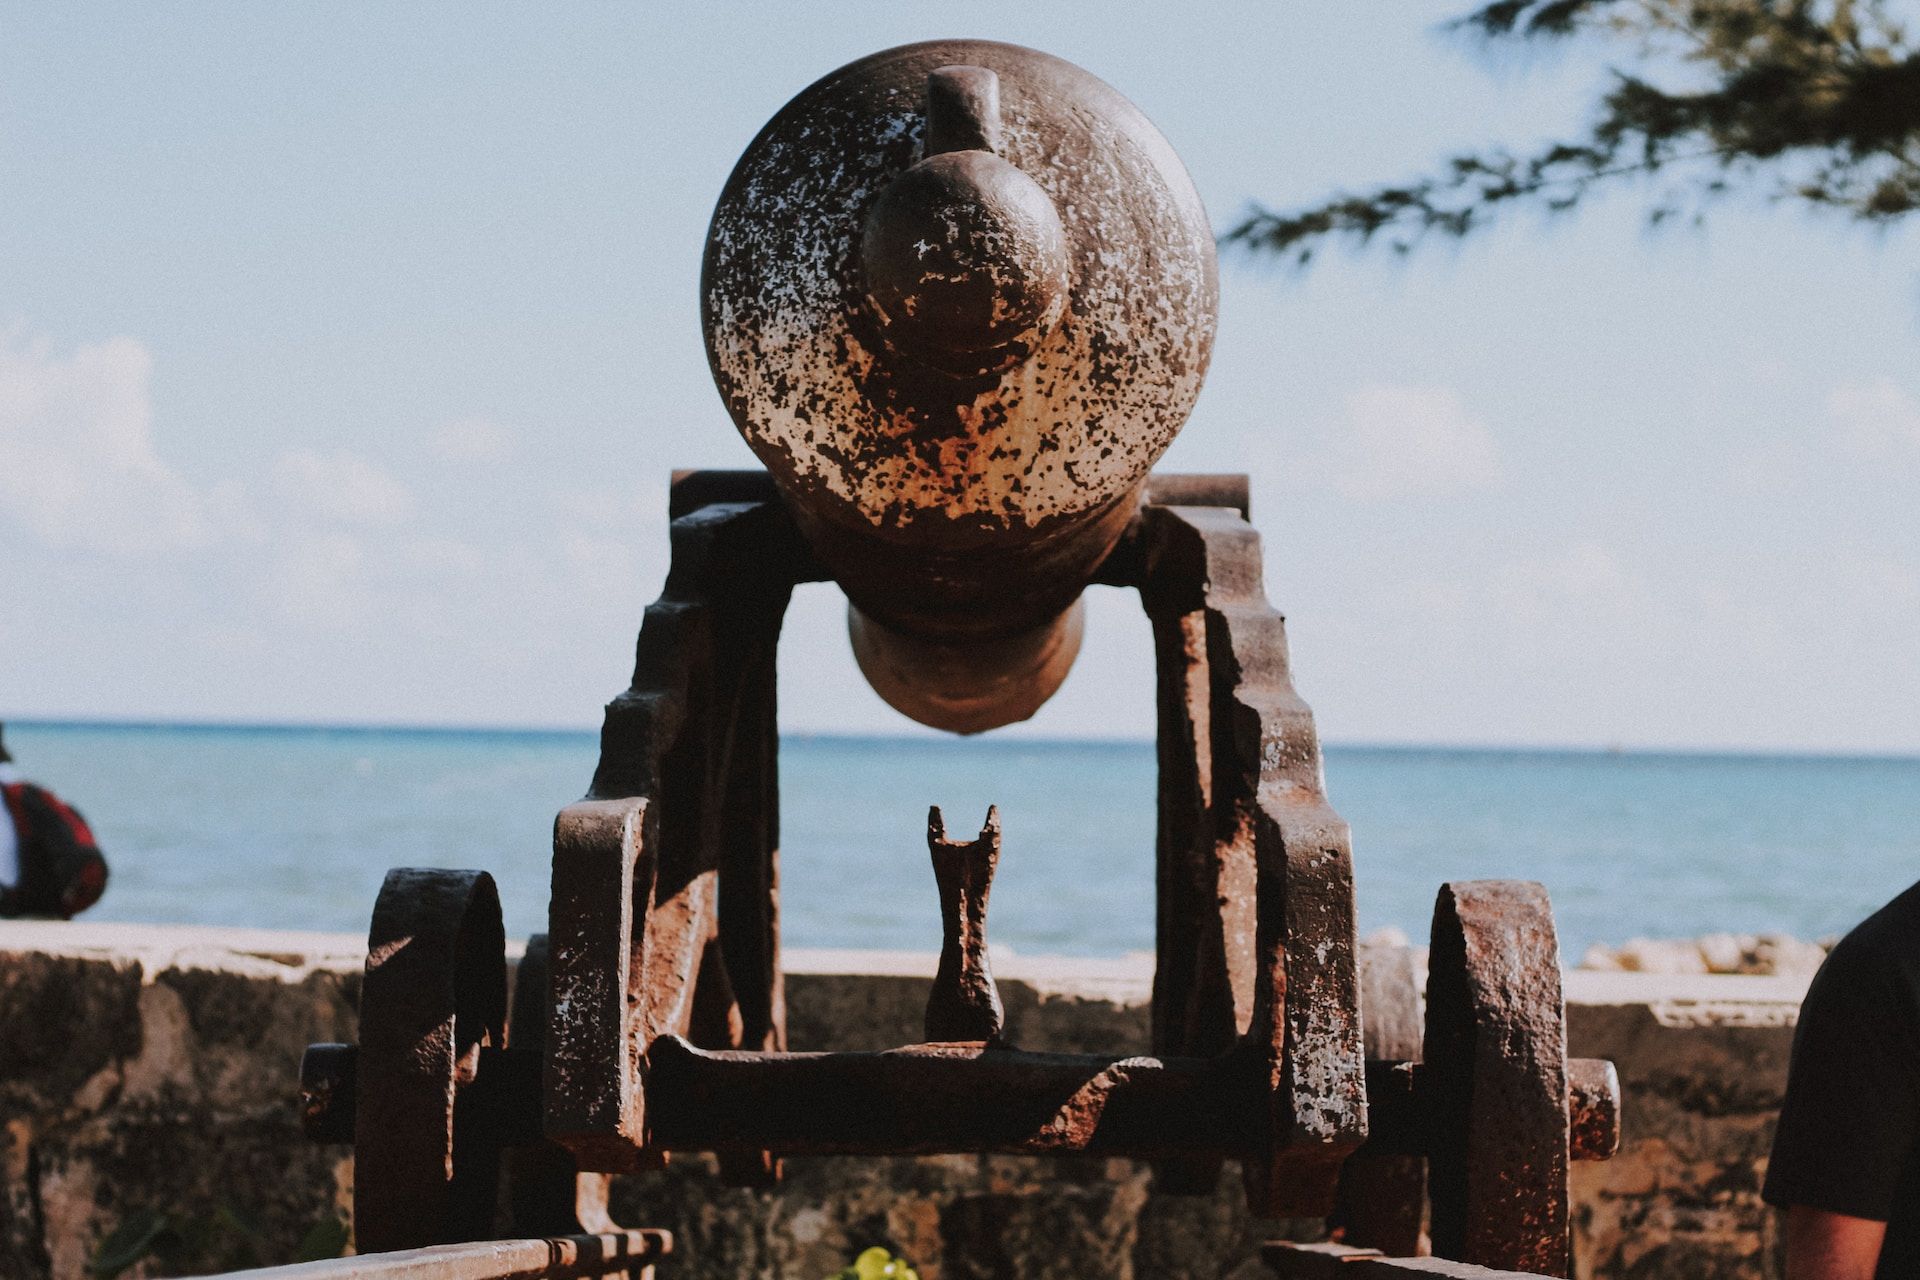 An old historic canon in Falmouth, Jamaica